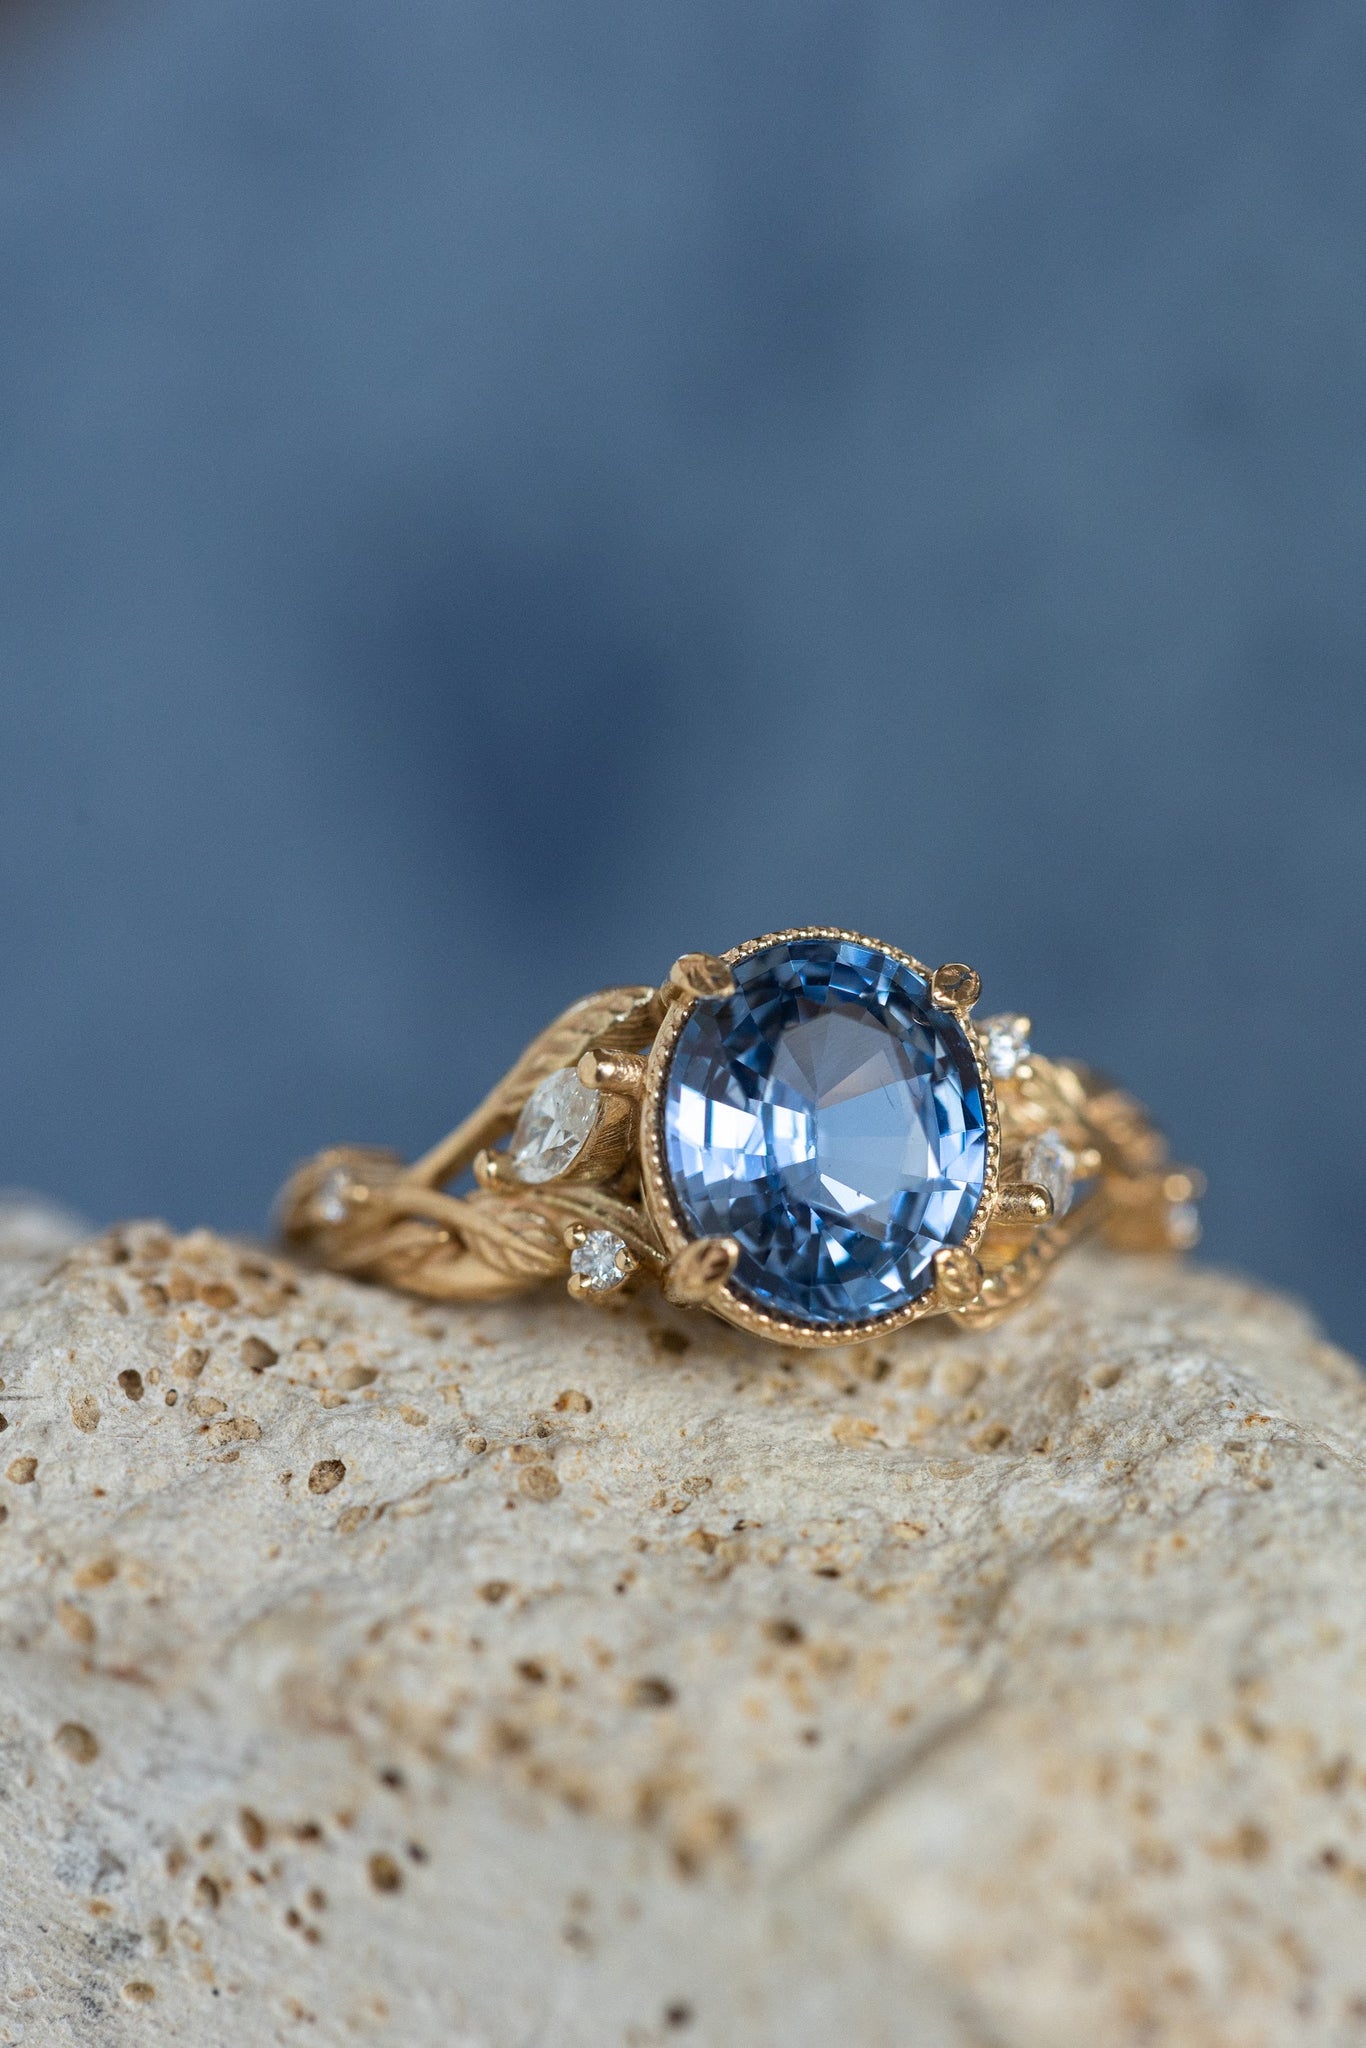 READY TO SHIP: Patricia ring set in 14K yellow gold, natural sapphire oval cut 8x6* mm, accent natural diamonds, AVAILABLE RING SIZES: 6-8US - Eden Garden Jewelry™